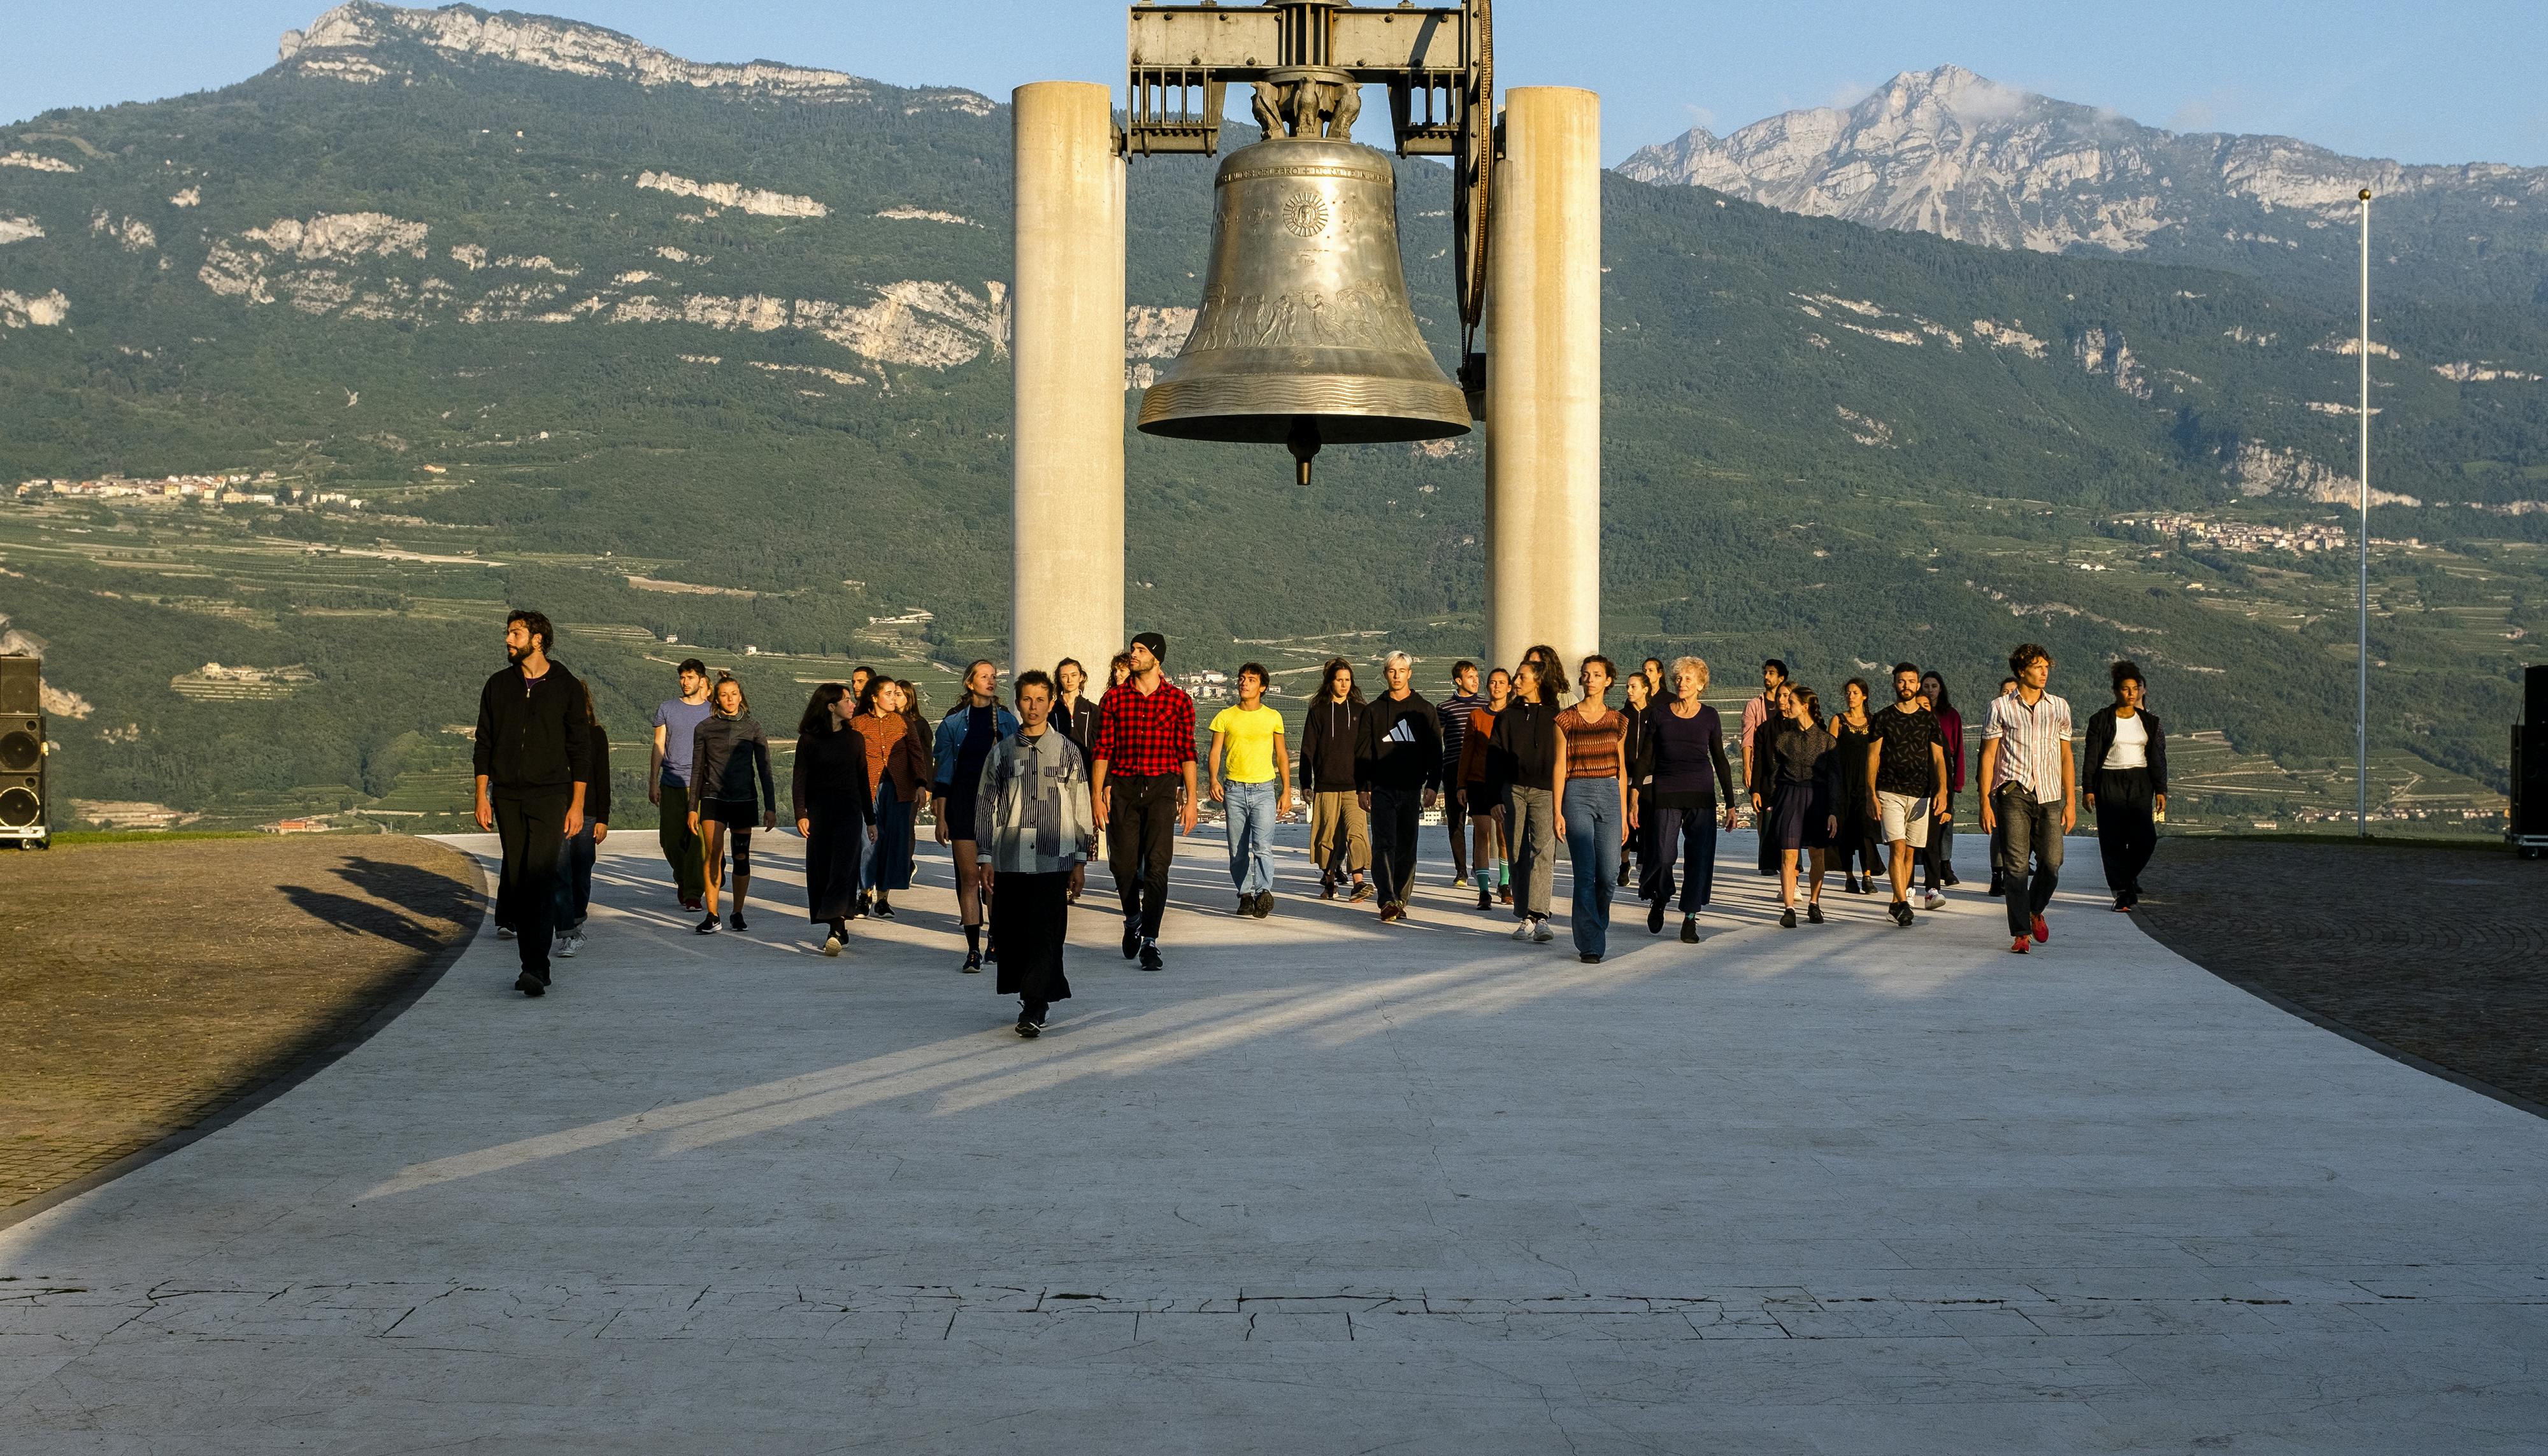 Alessio Maria Romano's performance Choros at the Campana dei Caduti in Rovereto. A large group of performers, in front of the bell, walk towards the camera illuminated by the dawning sun.